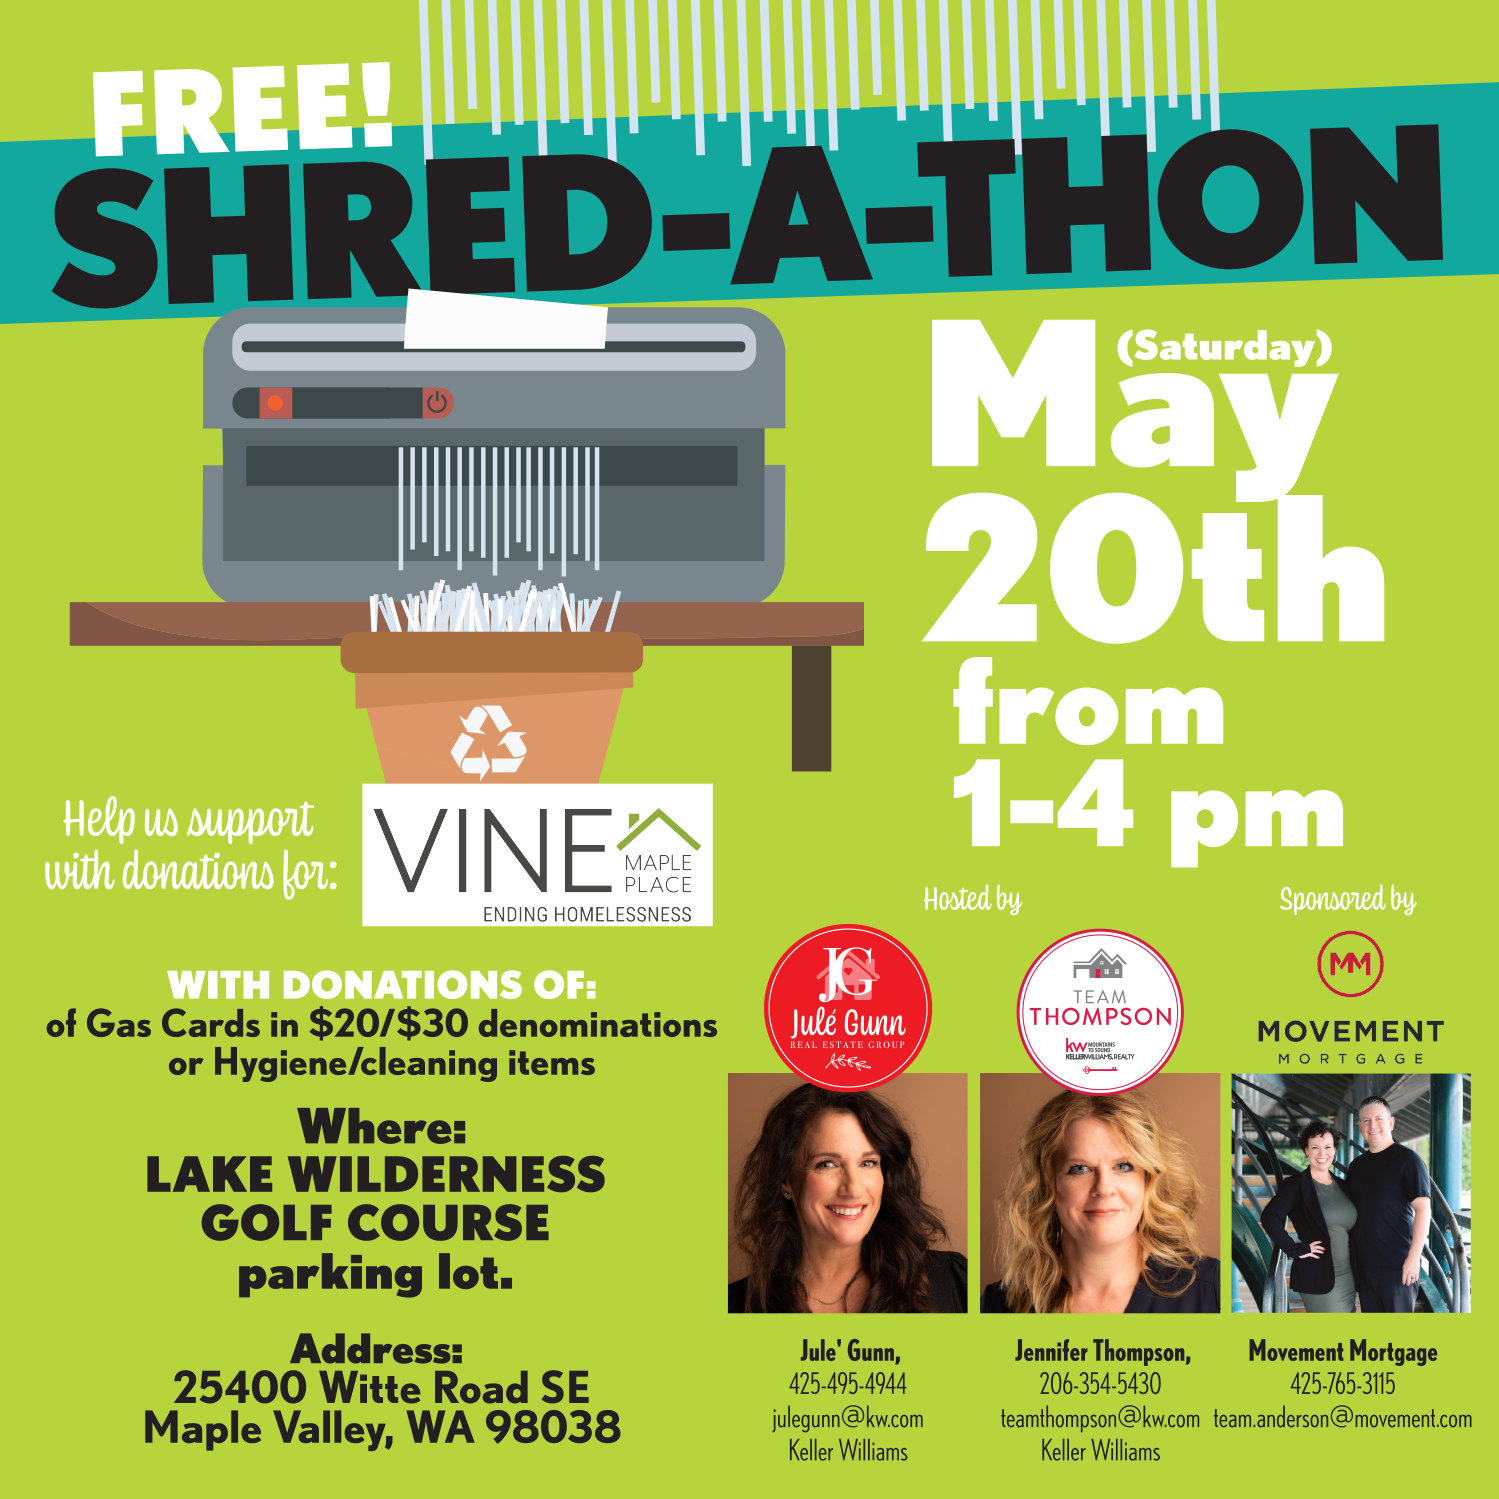 Free Shred a Thon and Vine Maple Place Donation Drive Maple Valley